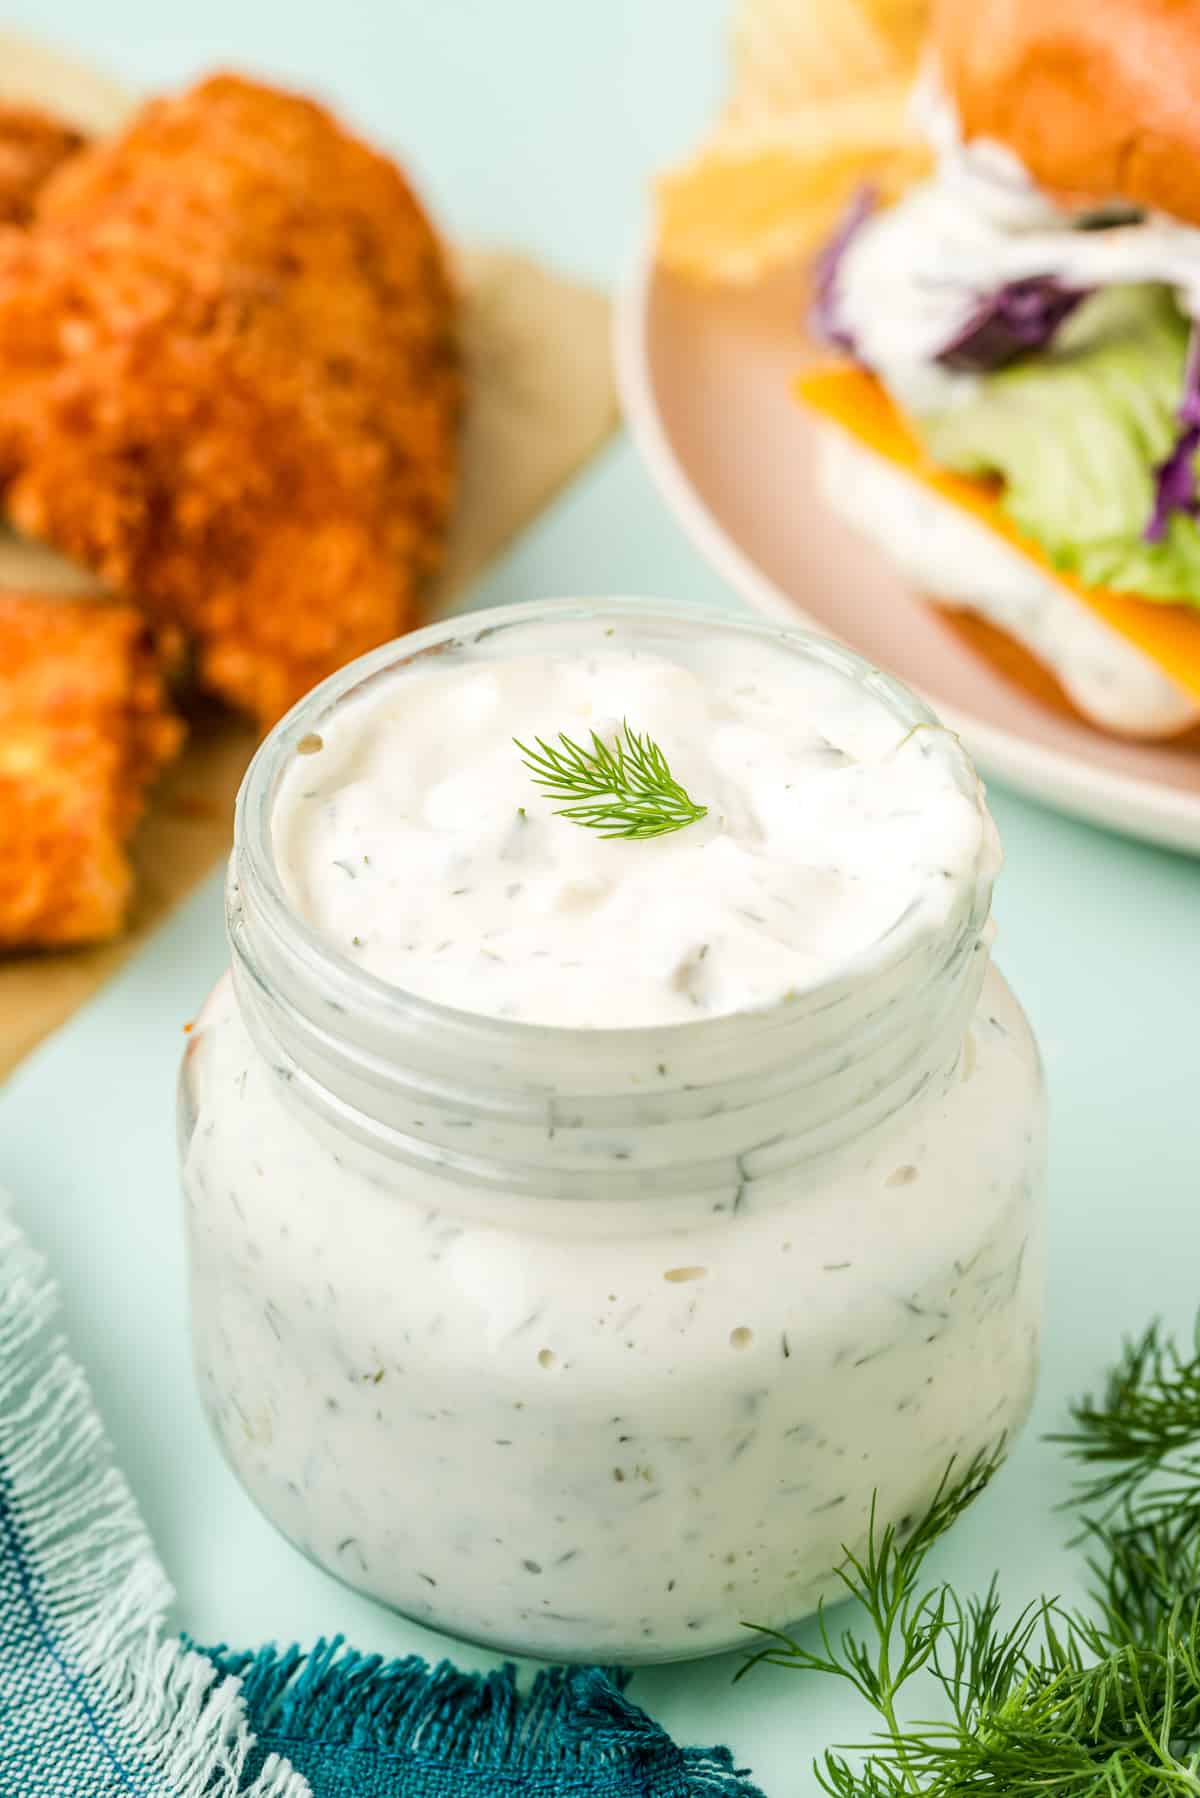 Homemade Tartar Sauce in glass jar with a sprig of dill and fish and fish sandwich in background.